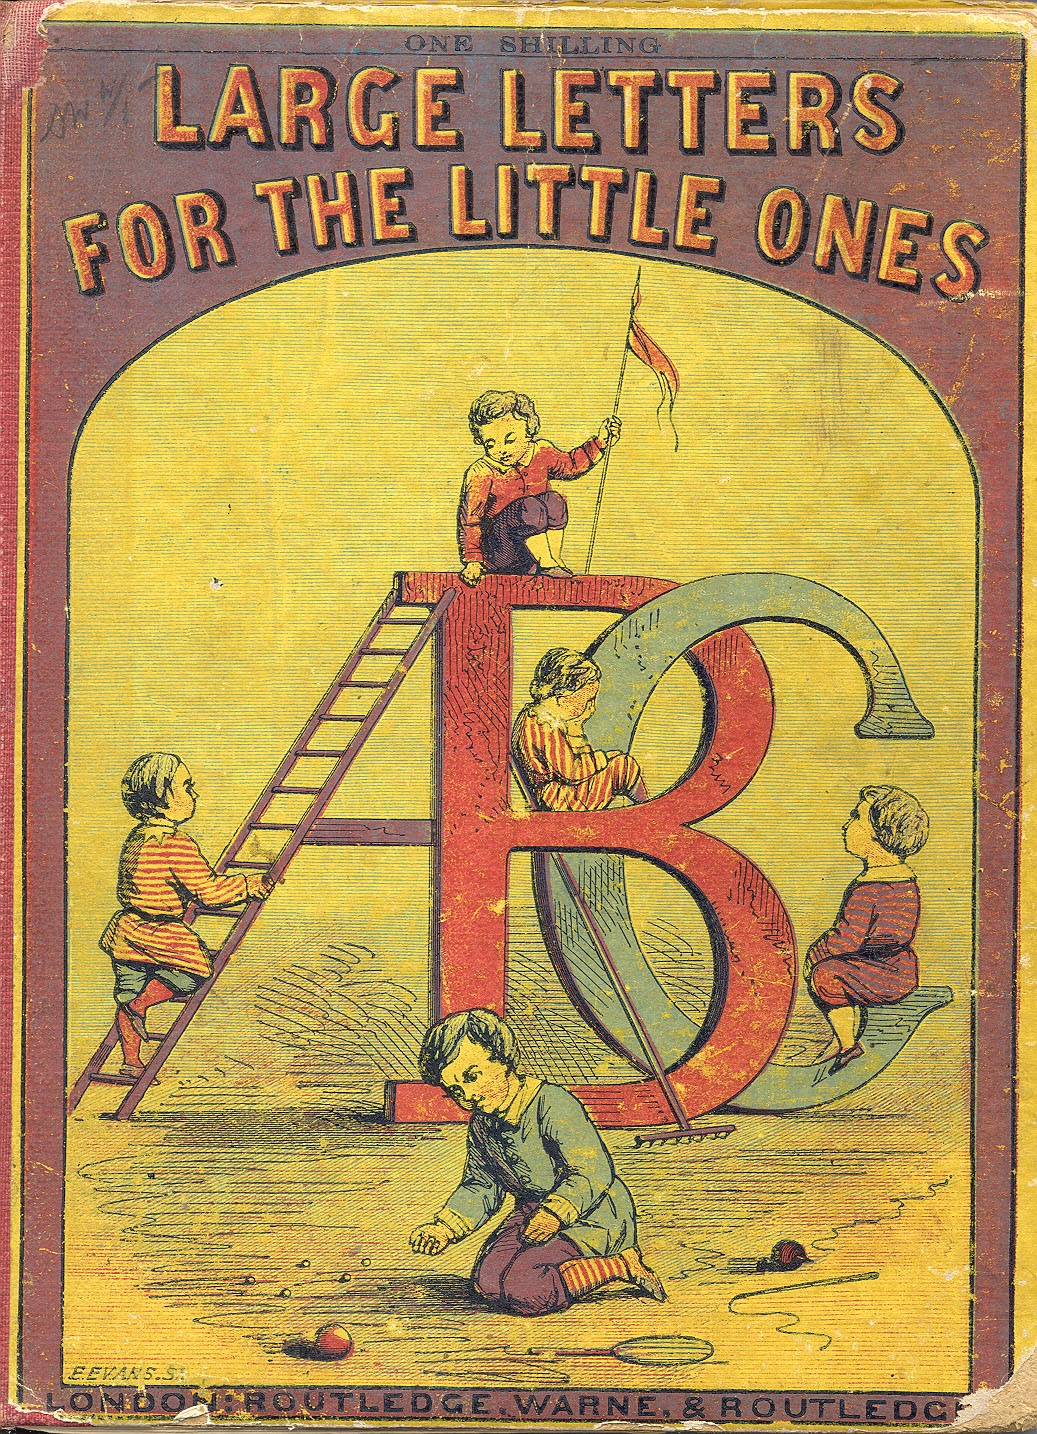 Cover of Large Letters for the Little Ones, by Edmund Evans, circa 1865